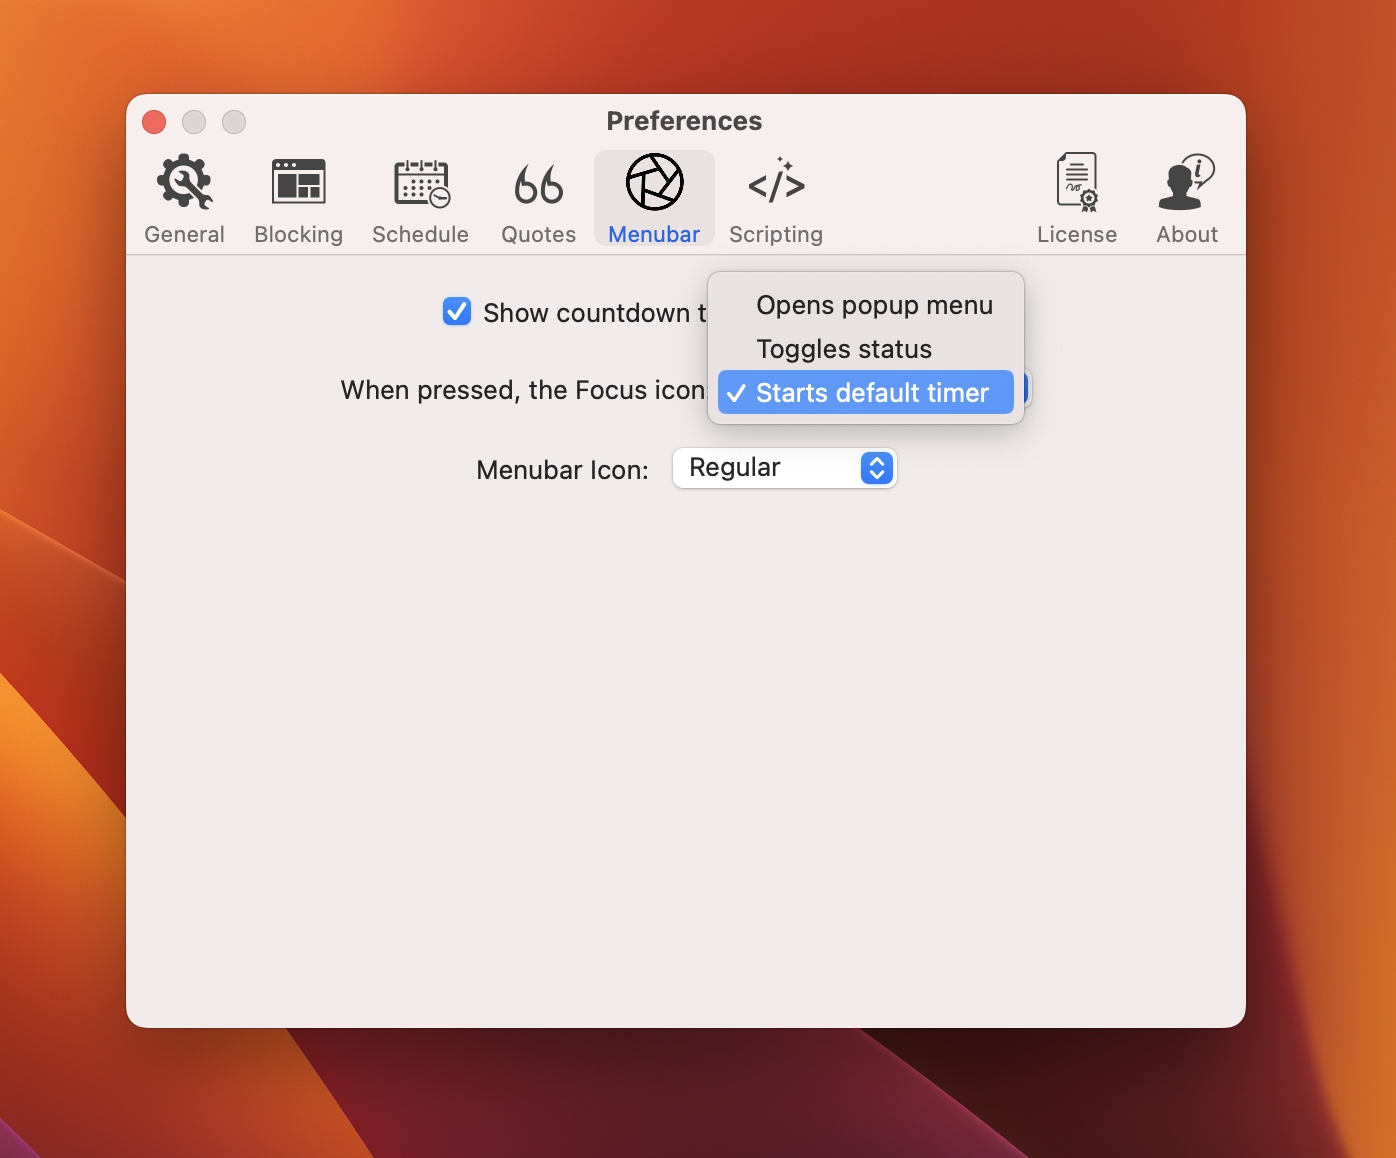 Focus lets you customize the behavior of the menubar icon, which caries over to the default behavior for the keyboard shortcut.